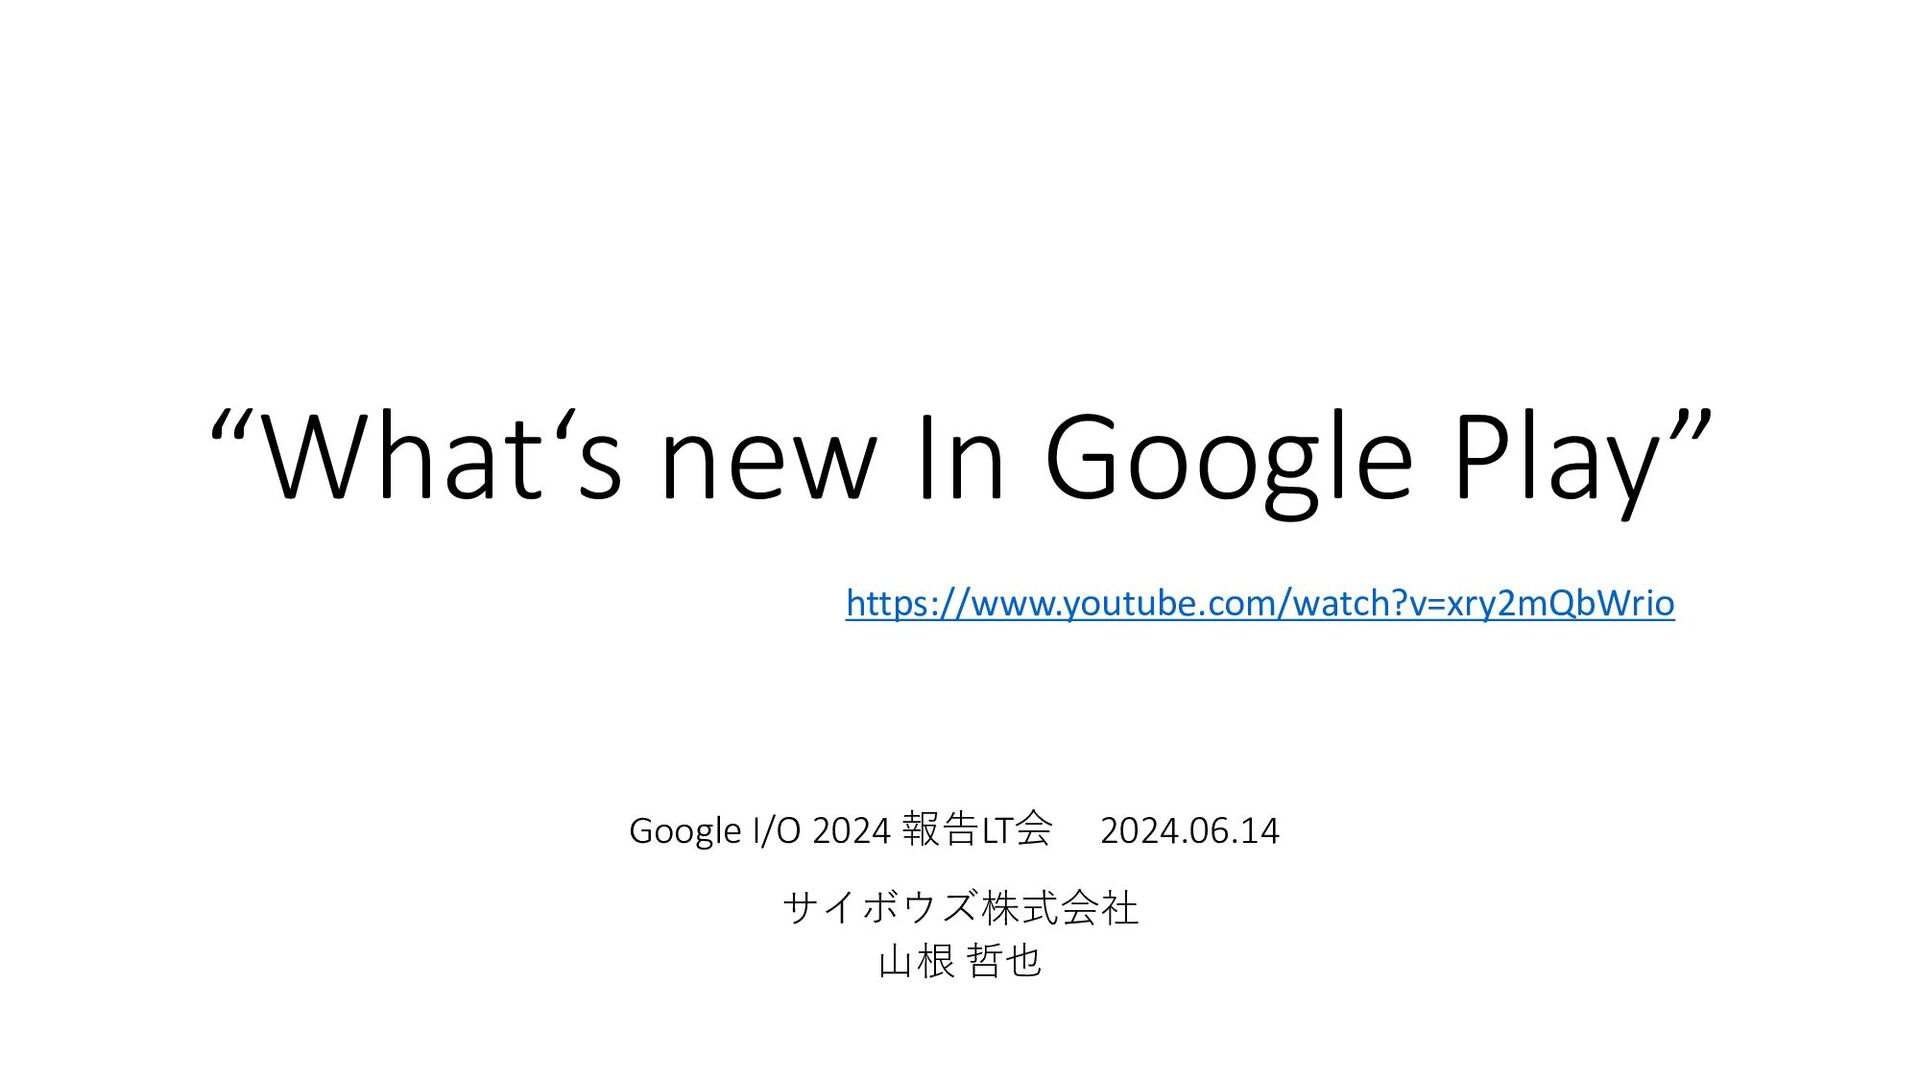 Slide Top: Google I/O 2024 - "What's New in Google Play"のまとめ